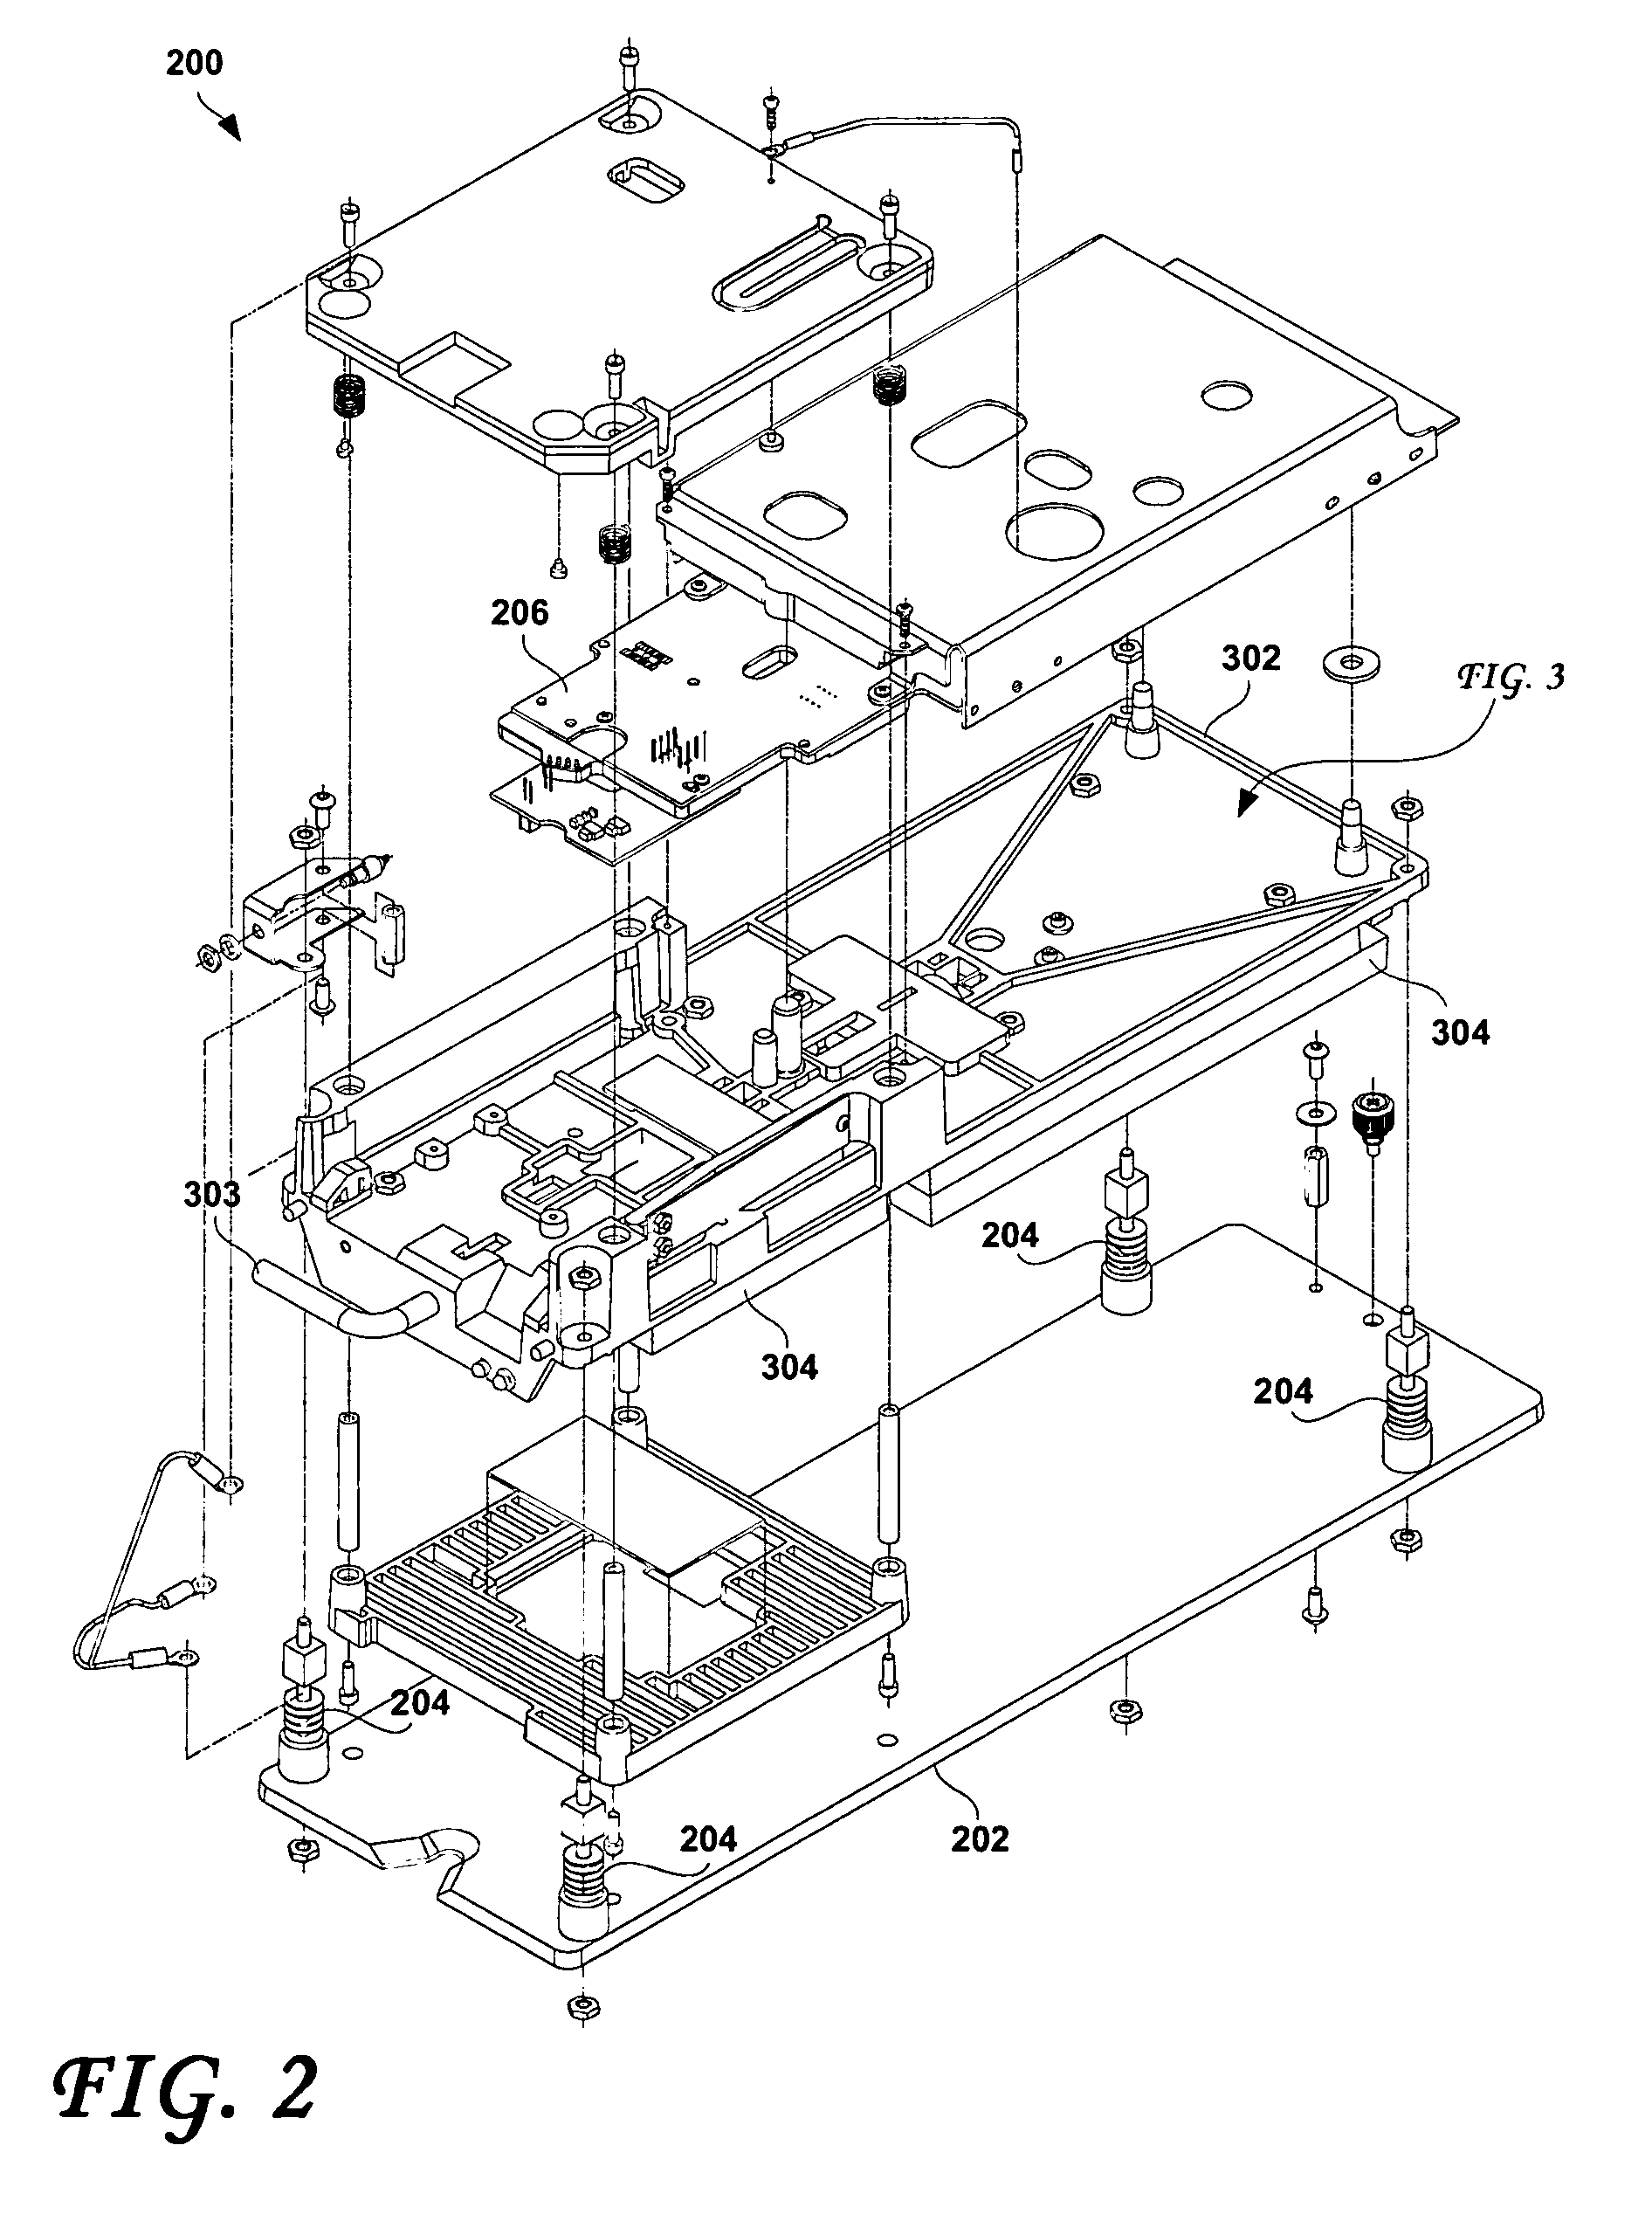 Vibration isolating disk drive receiving stations and chassis used in the manufacture and/or testing of hard disk drives